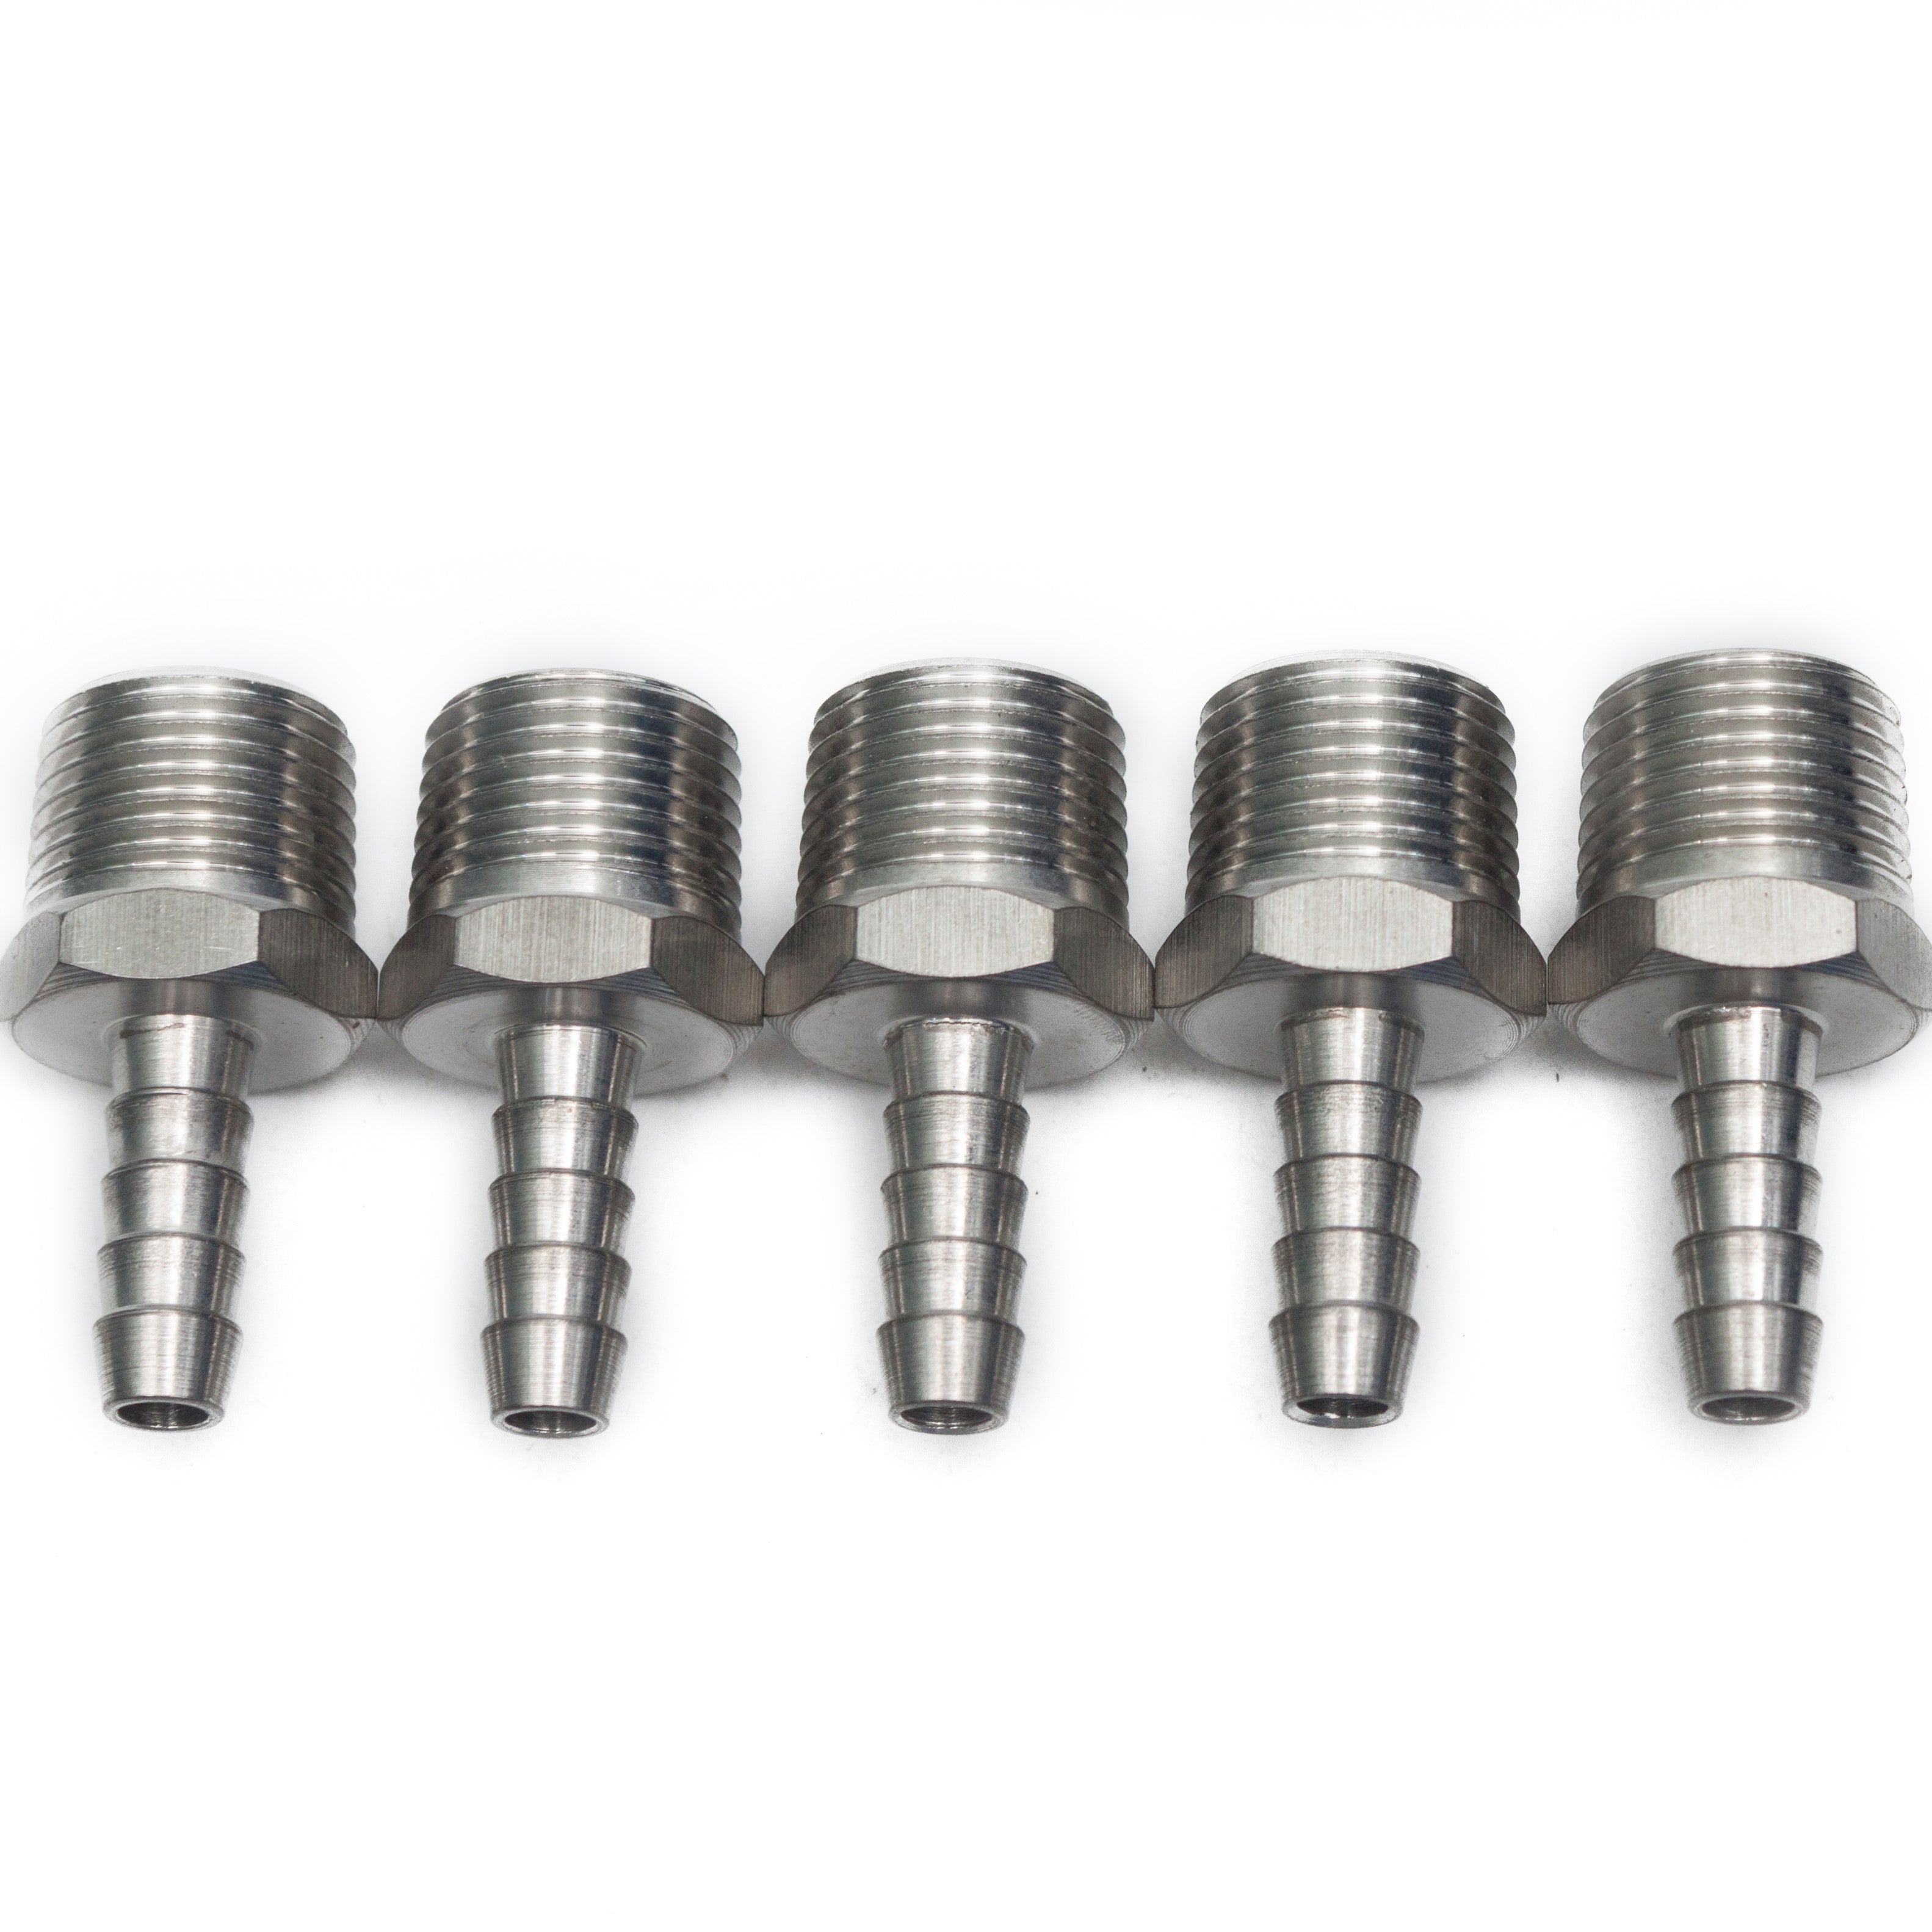 LTWFITTING Bar Production Stainless Steel 316 Barb Fitting Coupler/Connector 1/4 Inch Hose ID x 3/8 Inch Male NPT Air Fuel Water(Pack of 5)